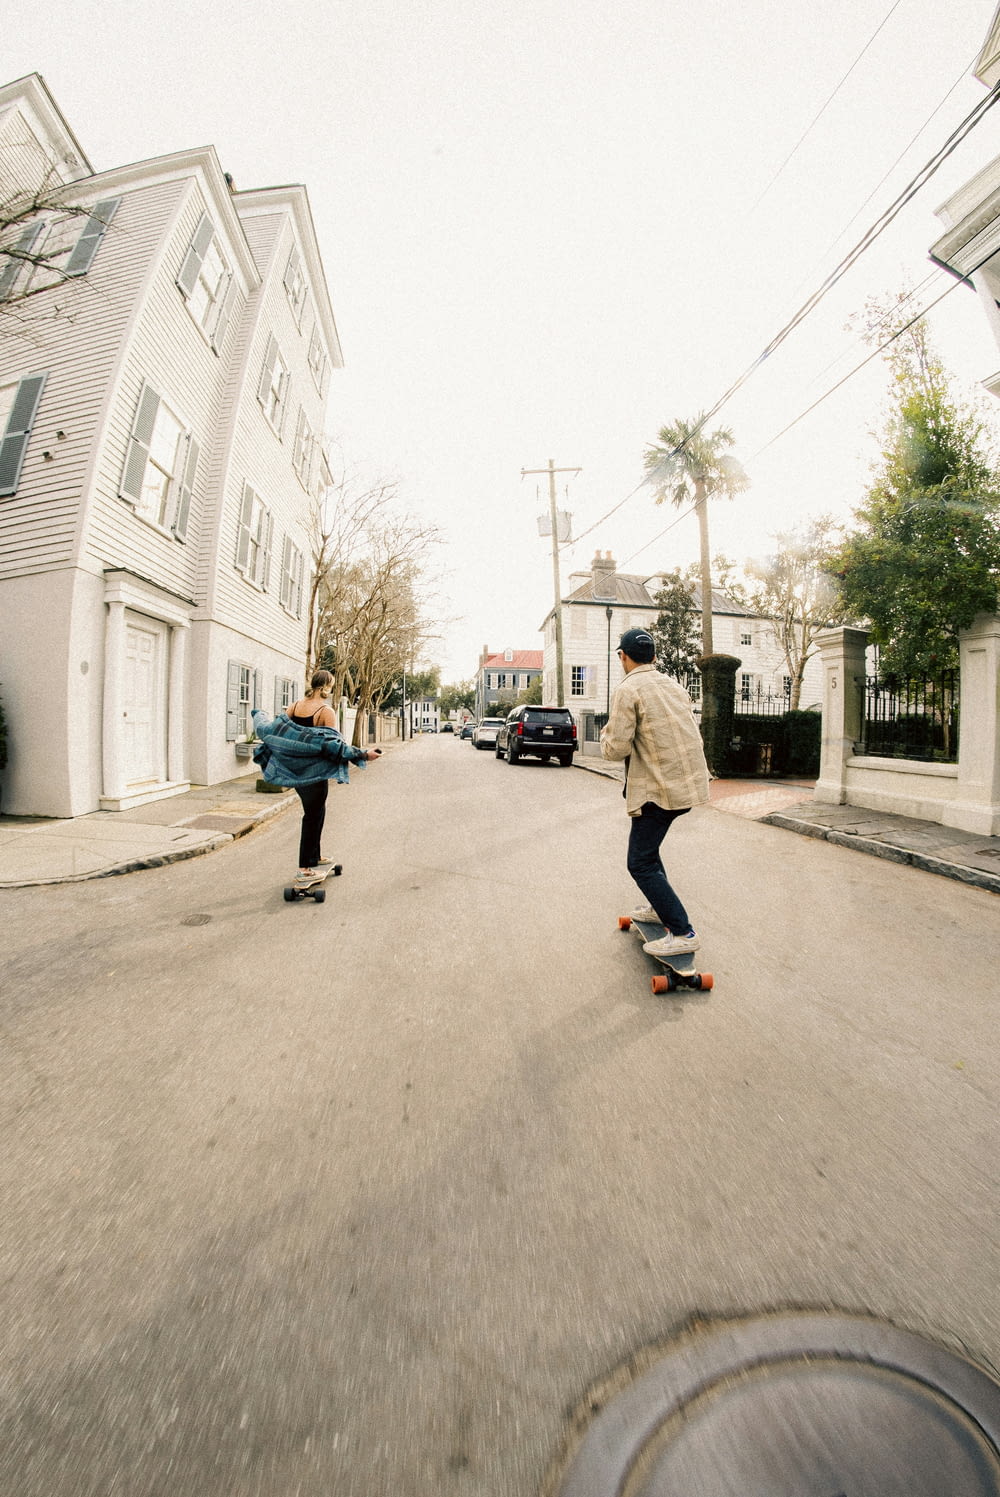 a couple of people riding skateboards down a street